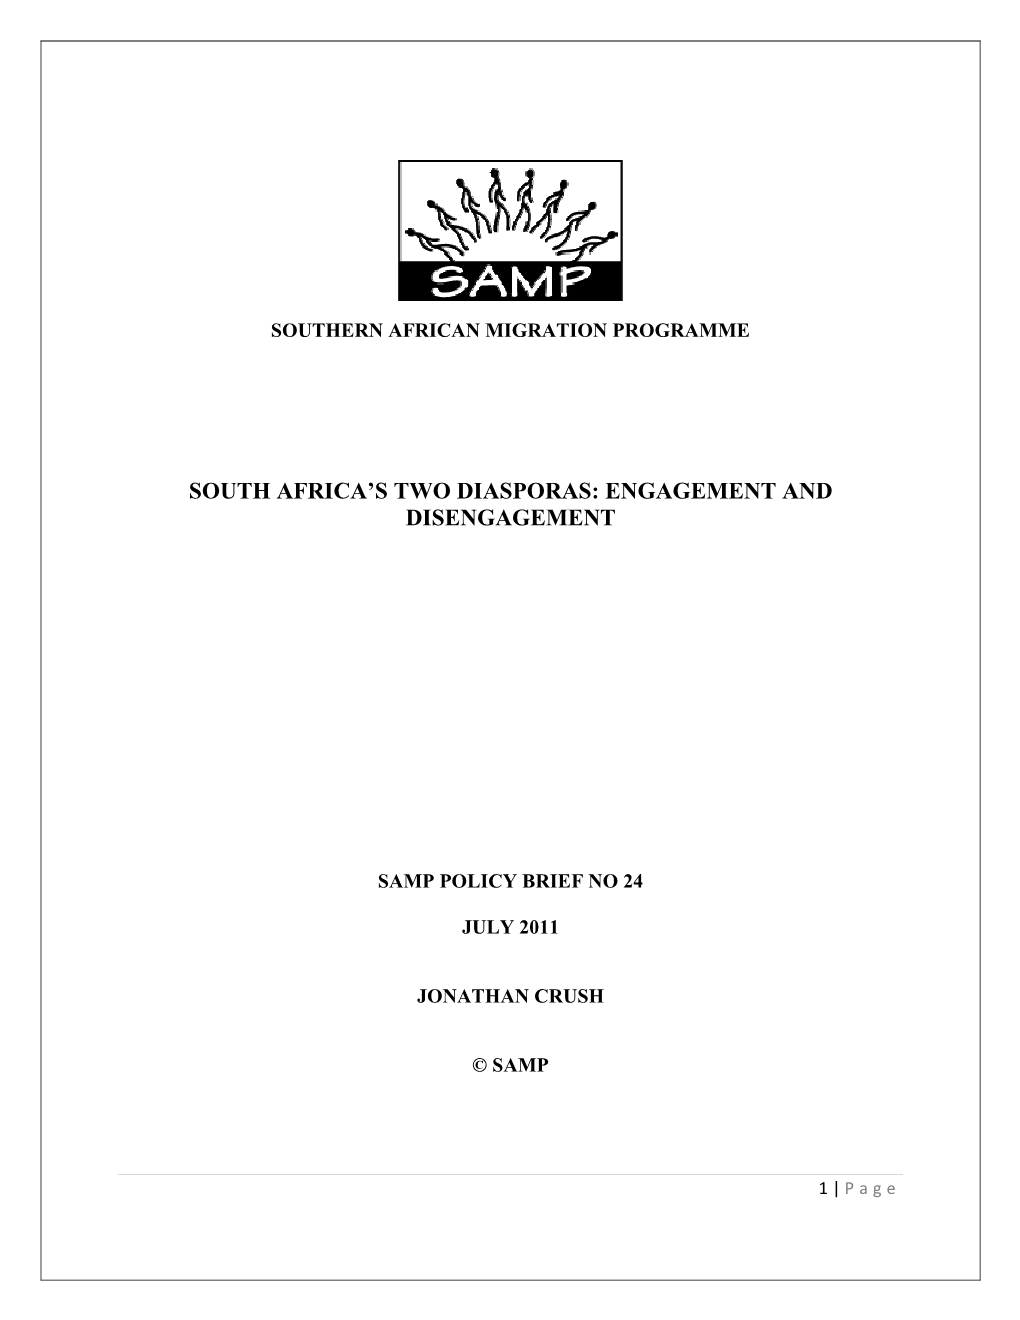 No.24: South Africa's Two Diasporas: Engagement and Disengagement, 2011